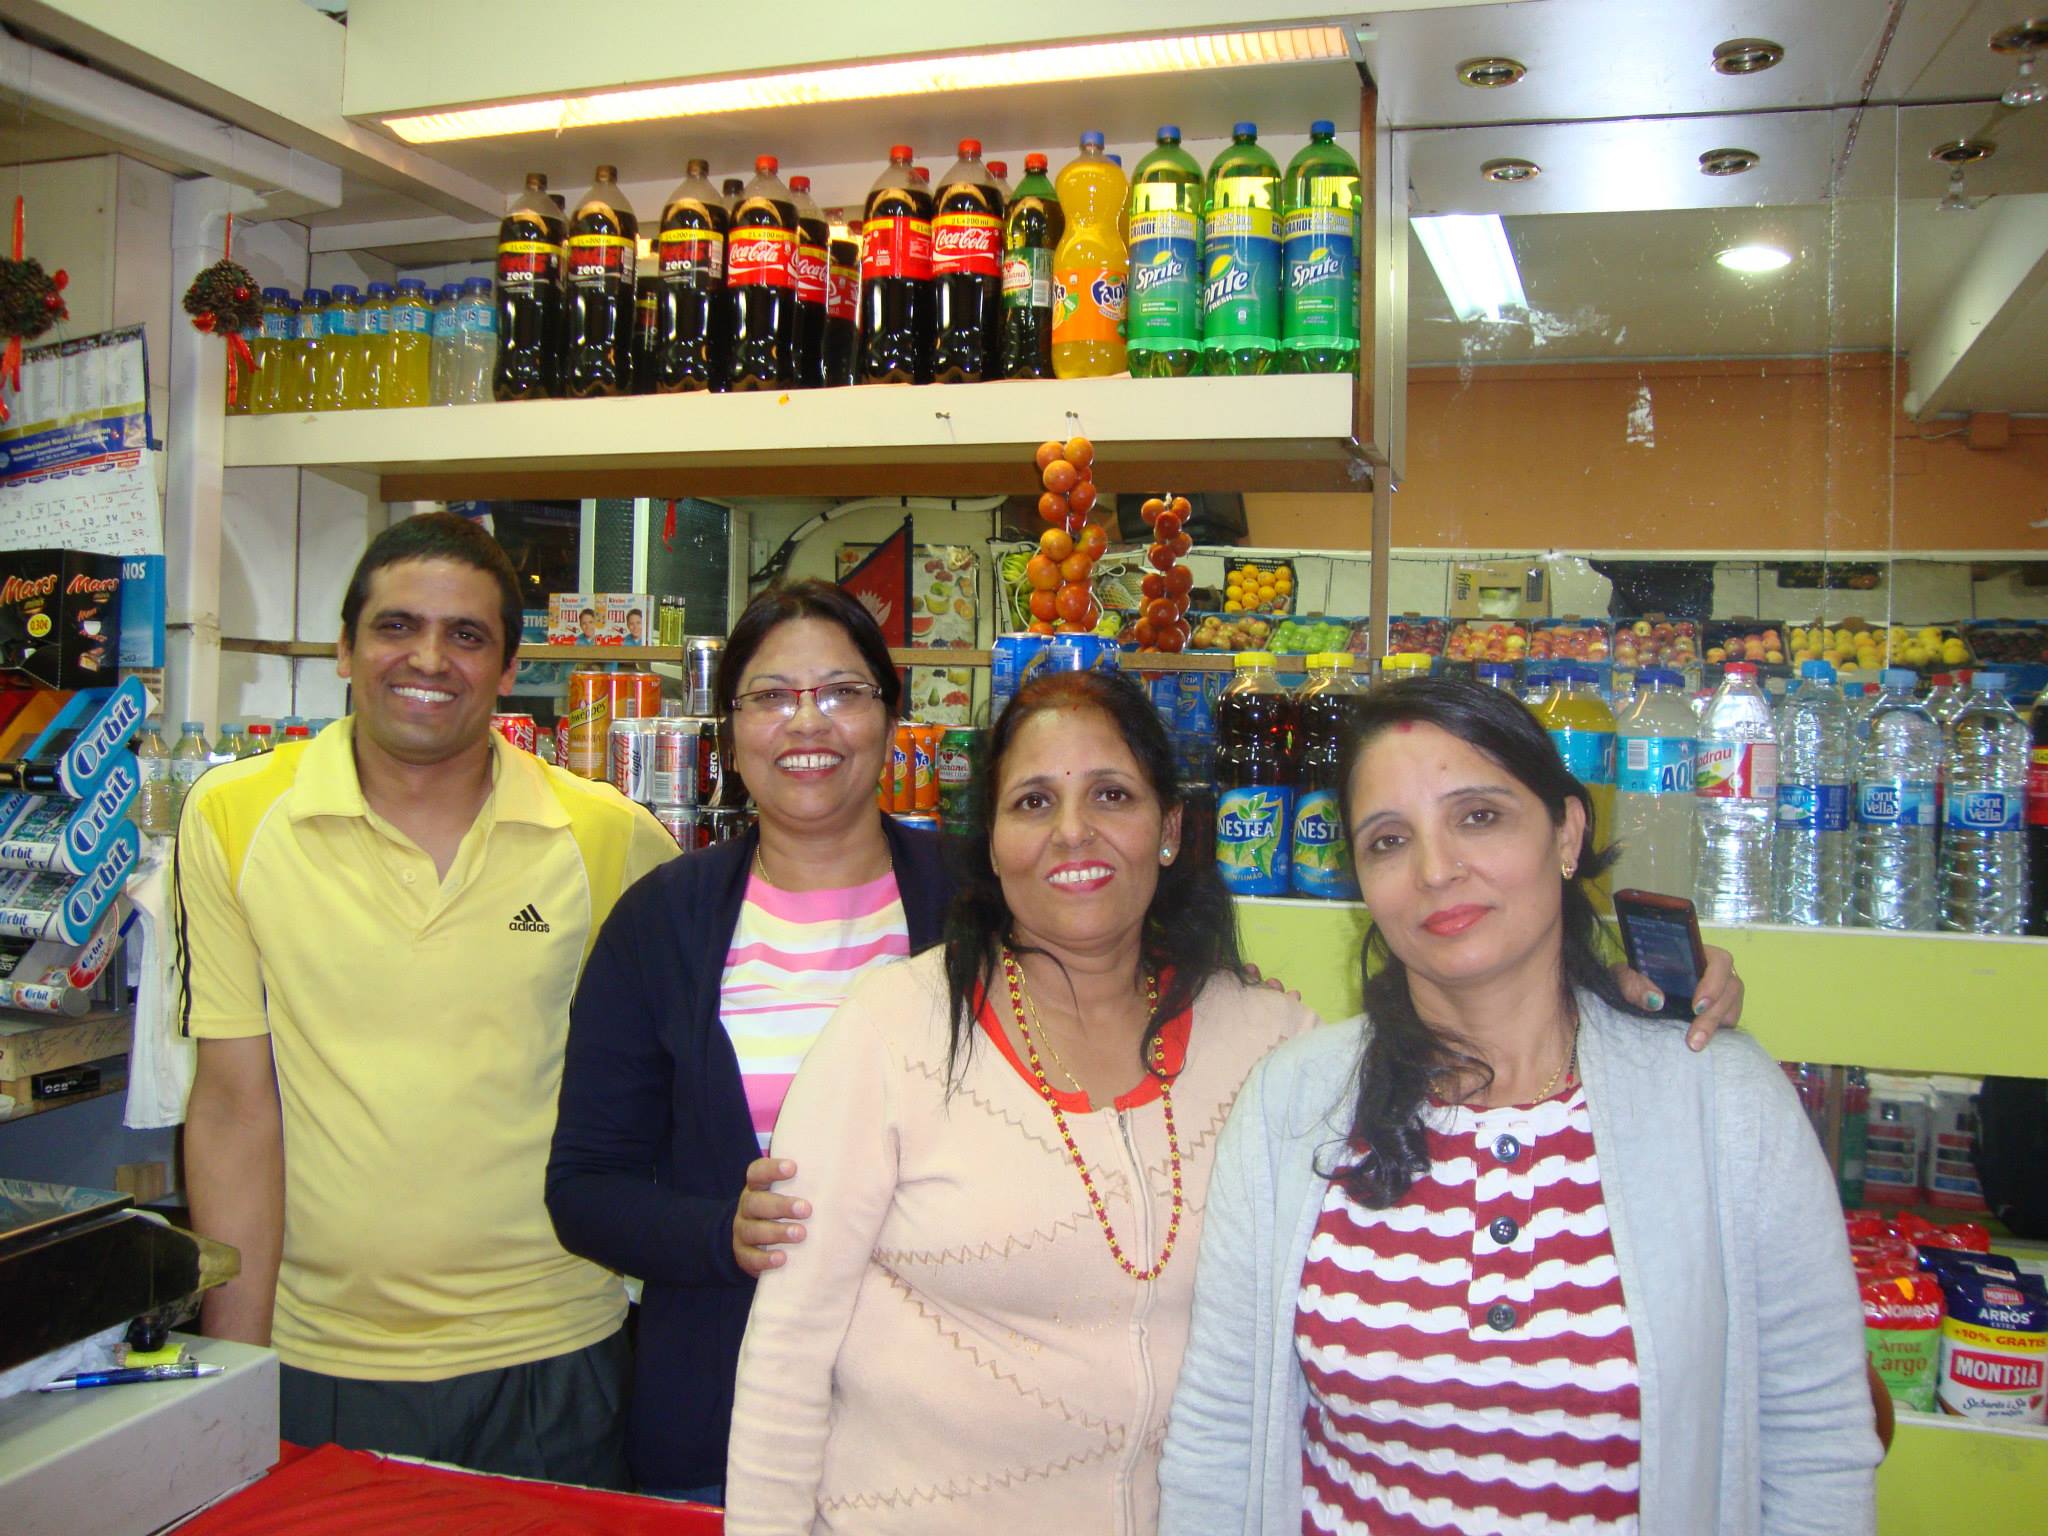 A complete team for grocery selection in Barcelona.